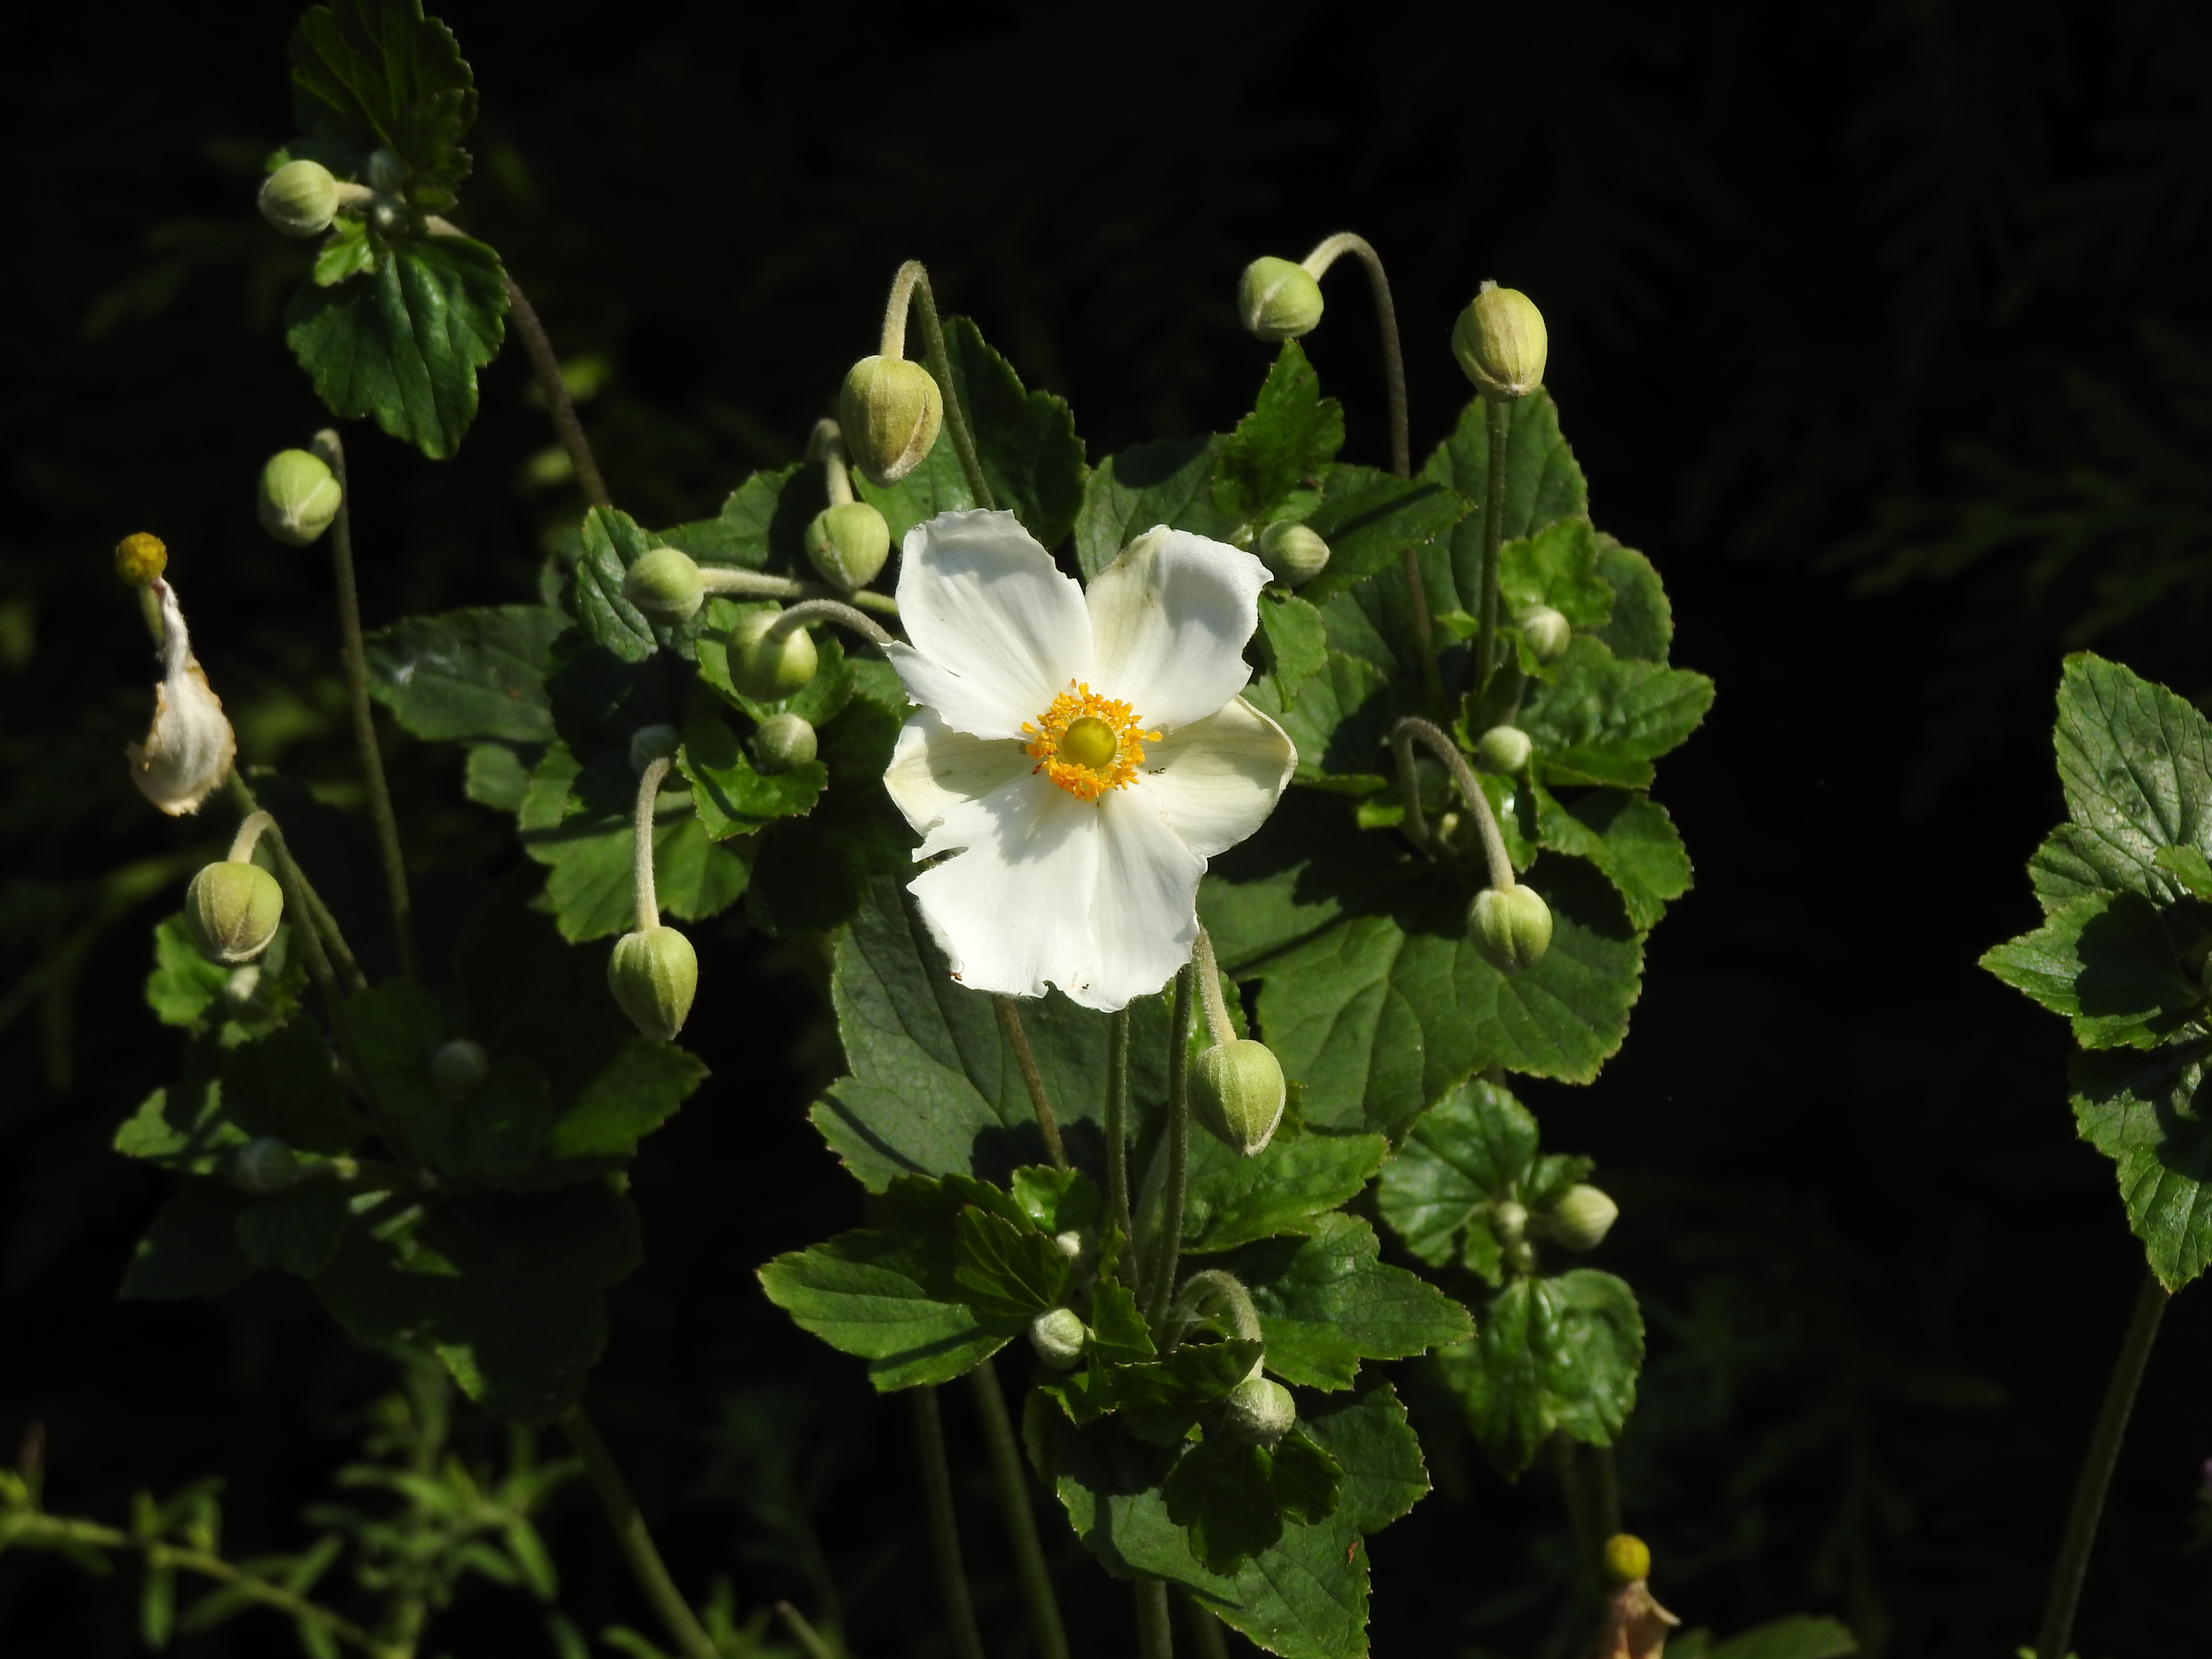 A white flower with a yellow center. Green leaves surround it